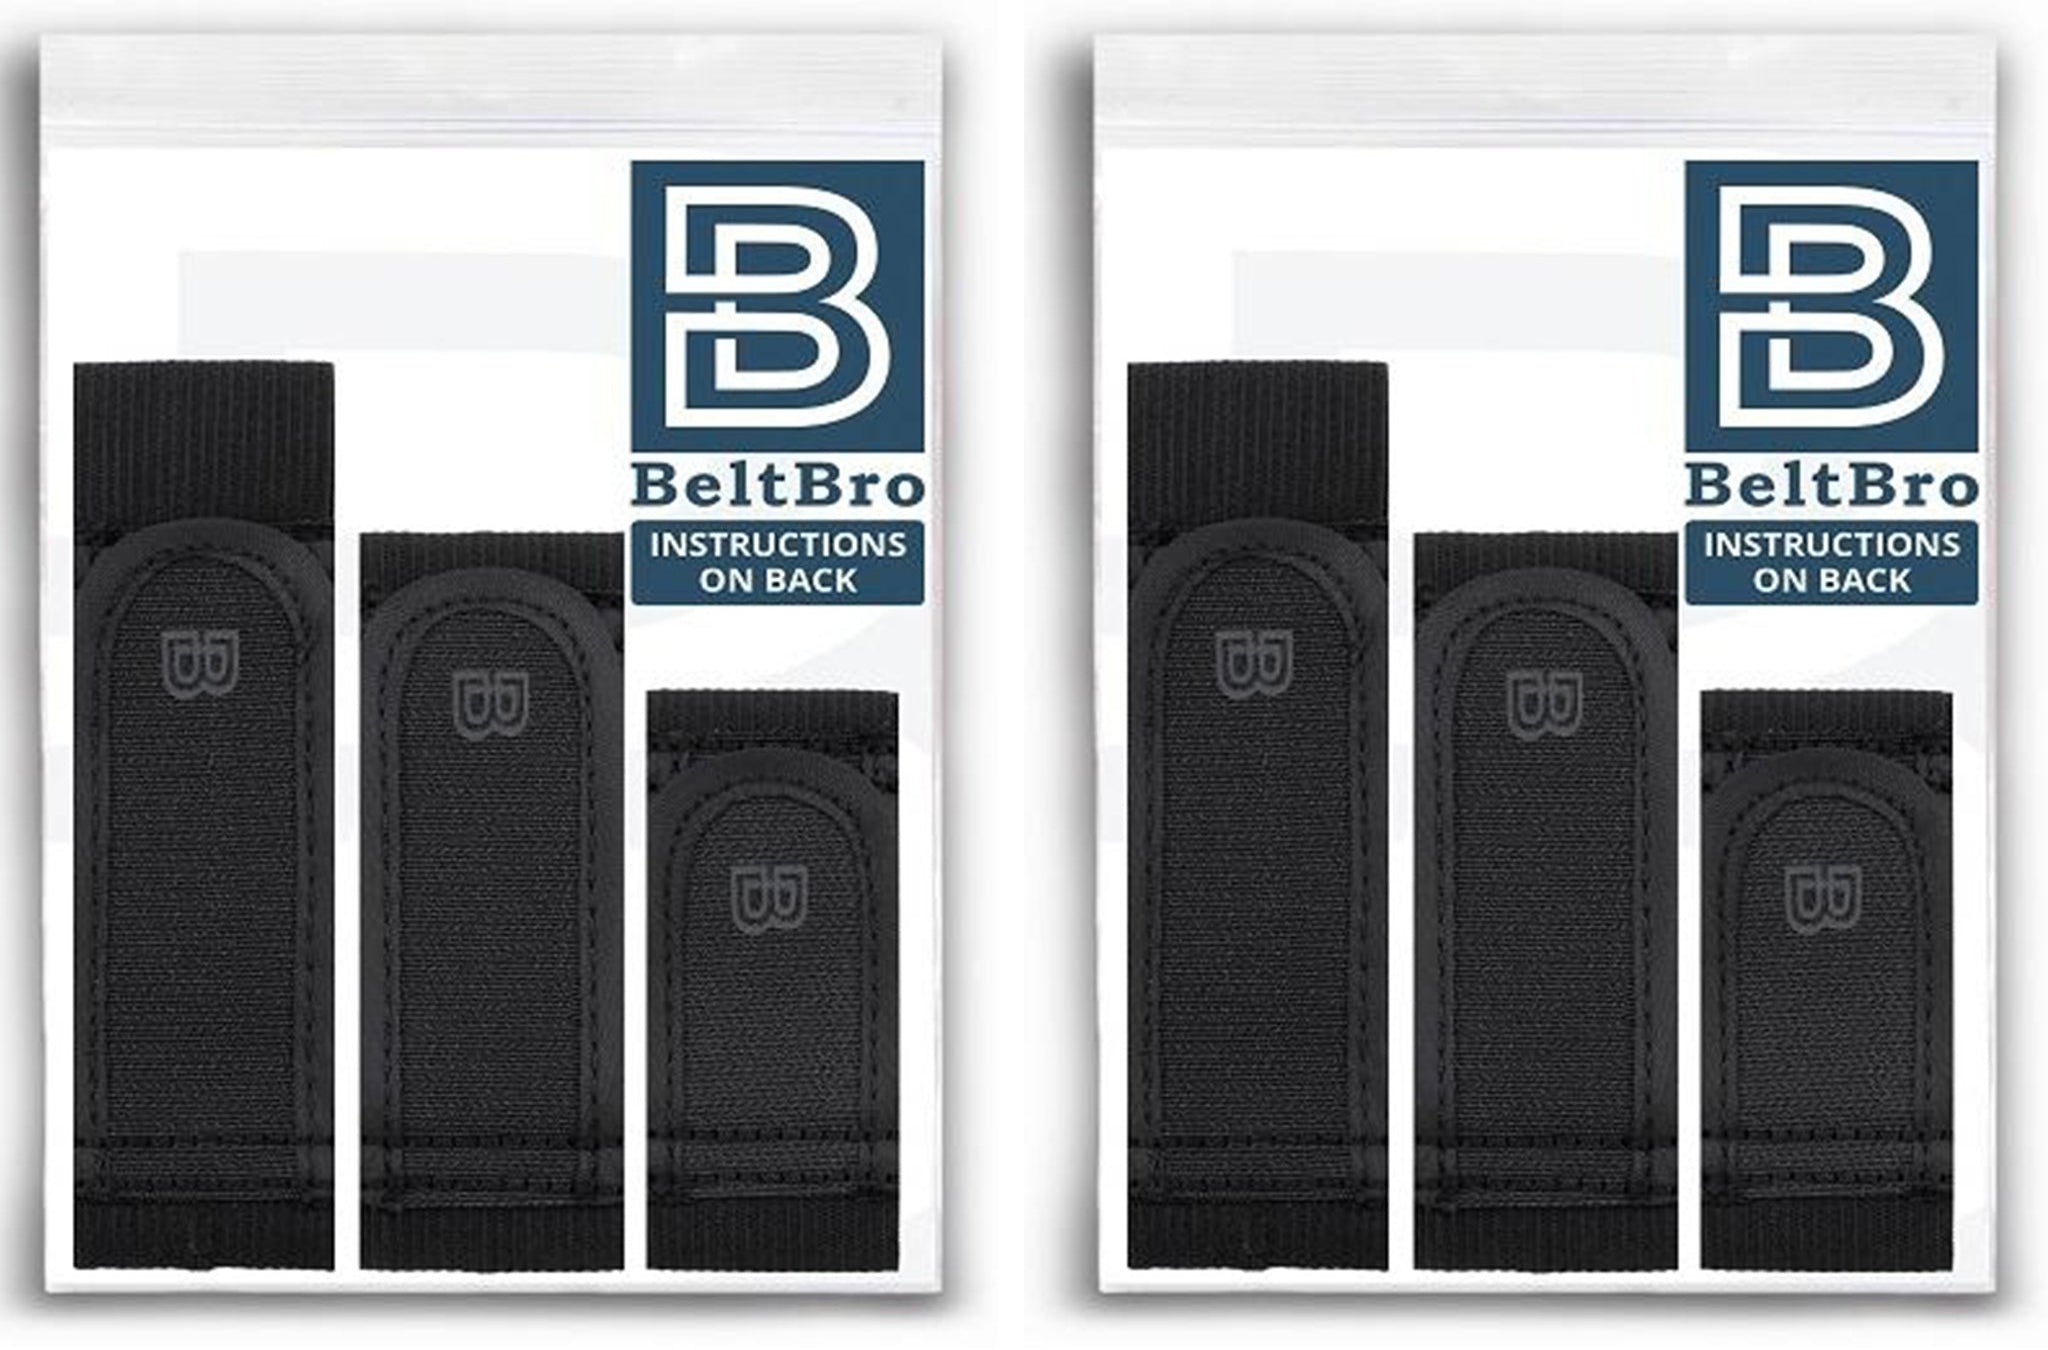 5 Reasons Why People Are Switching to BeltBro No Buckle Belts